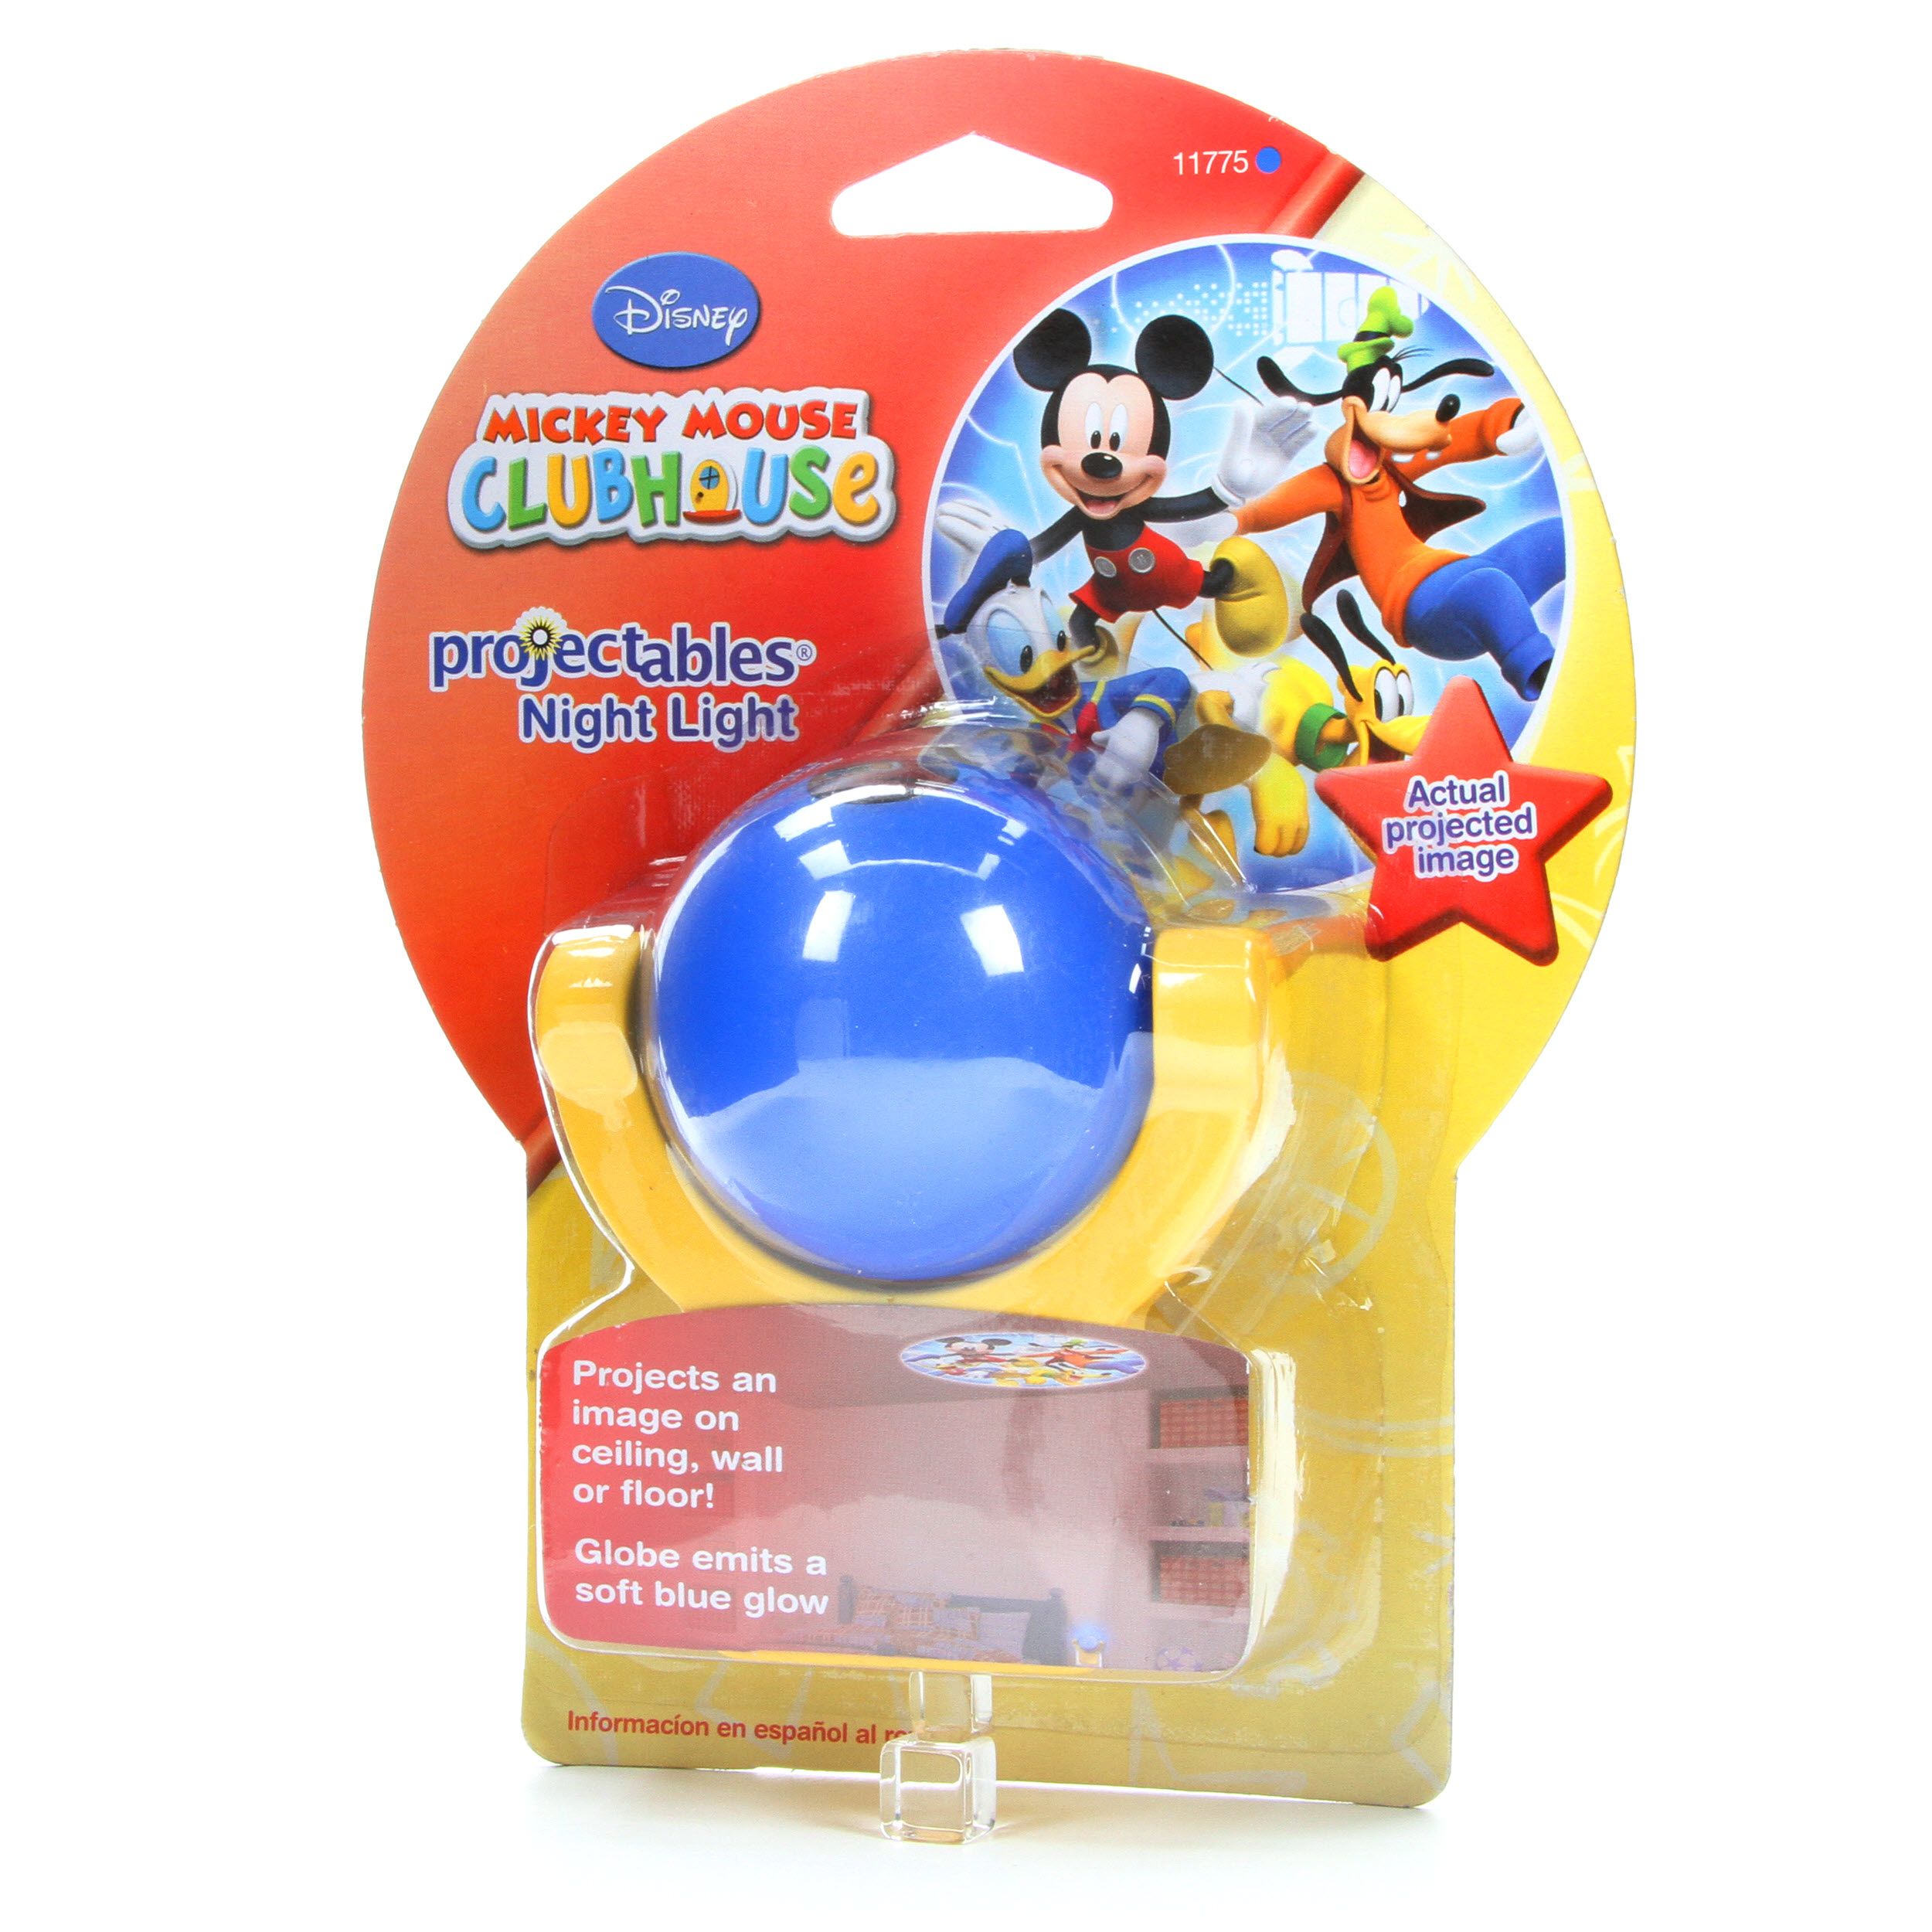 Projectables Disney Mikey Mouse Clubhouse Projectable LED Night Light T3 